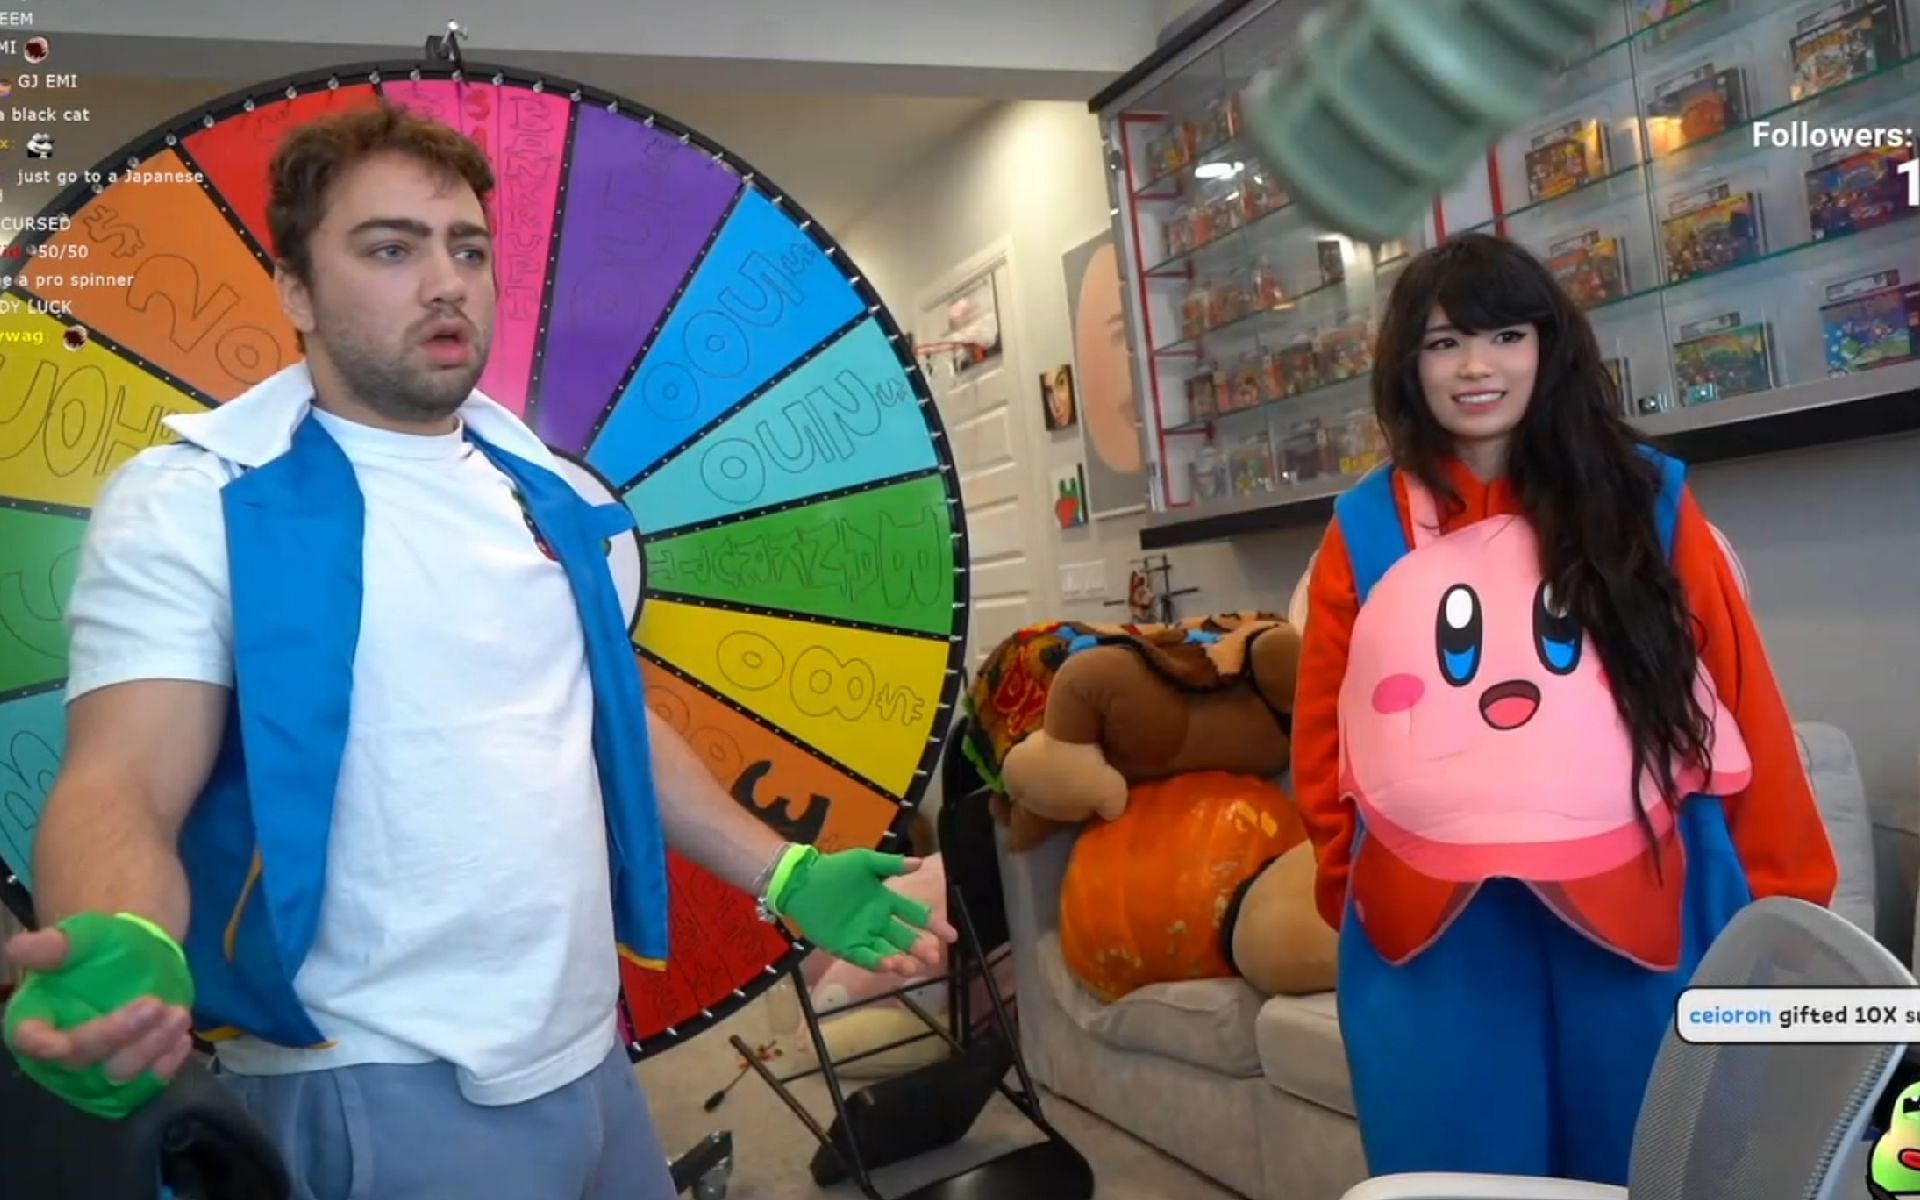 Mizkif was at a loss for words when Emiru spun the wheel and compelled him to spend $10,000 (Image via Mizkif/Twitch)